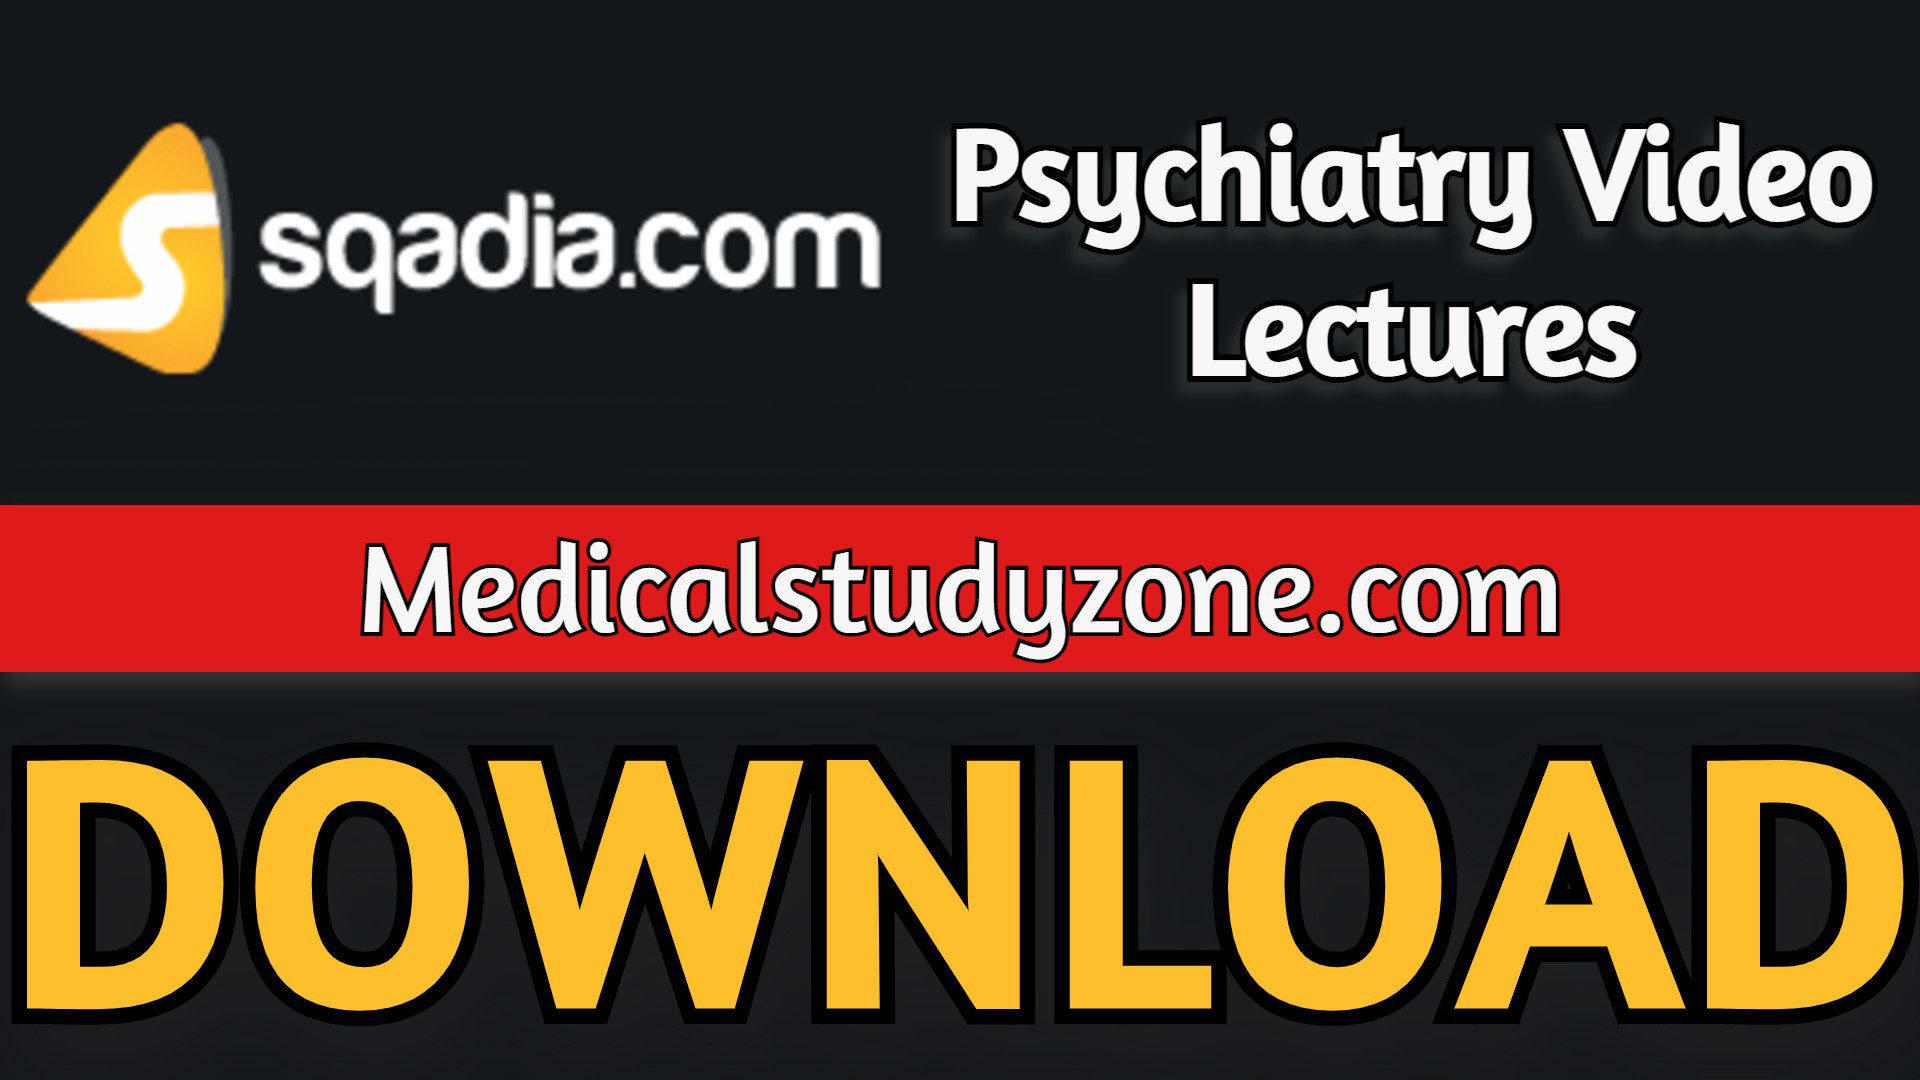 Sqadia Psychiatry Video Lectures 2022 Free Download